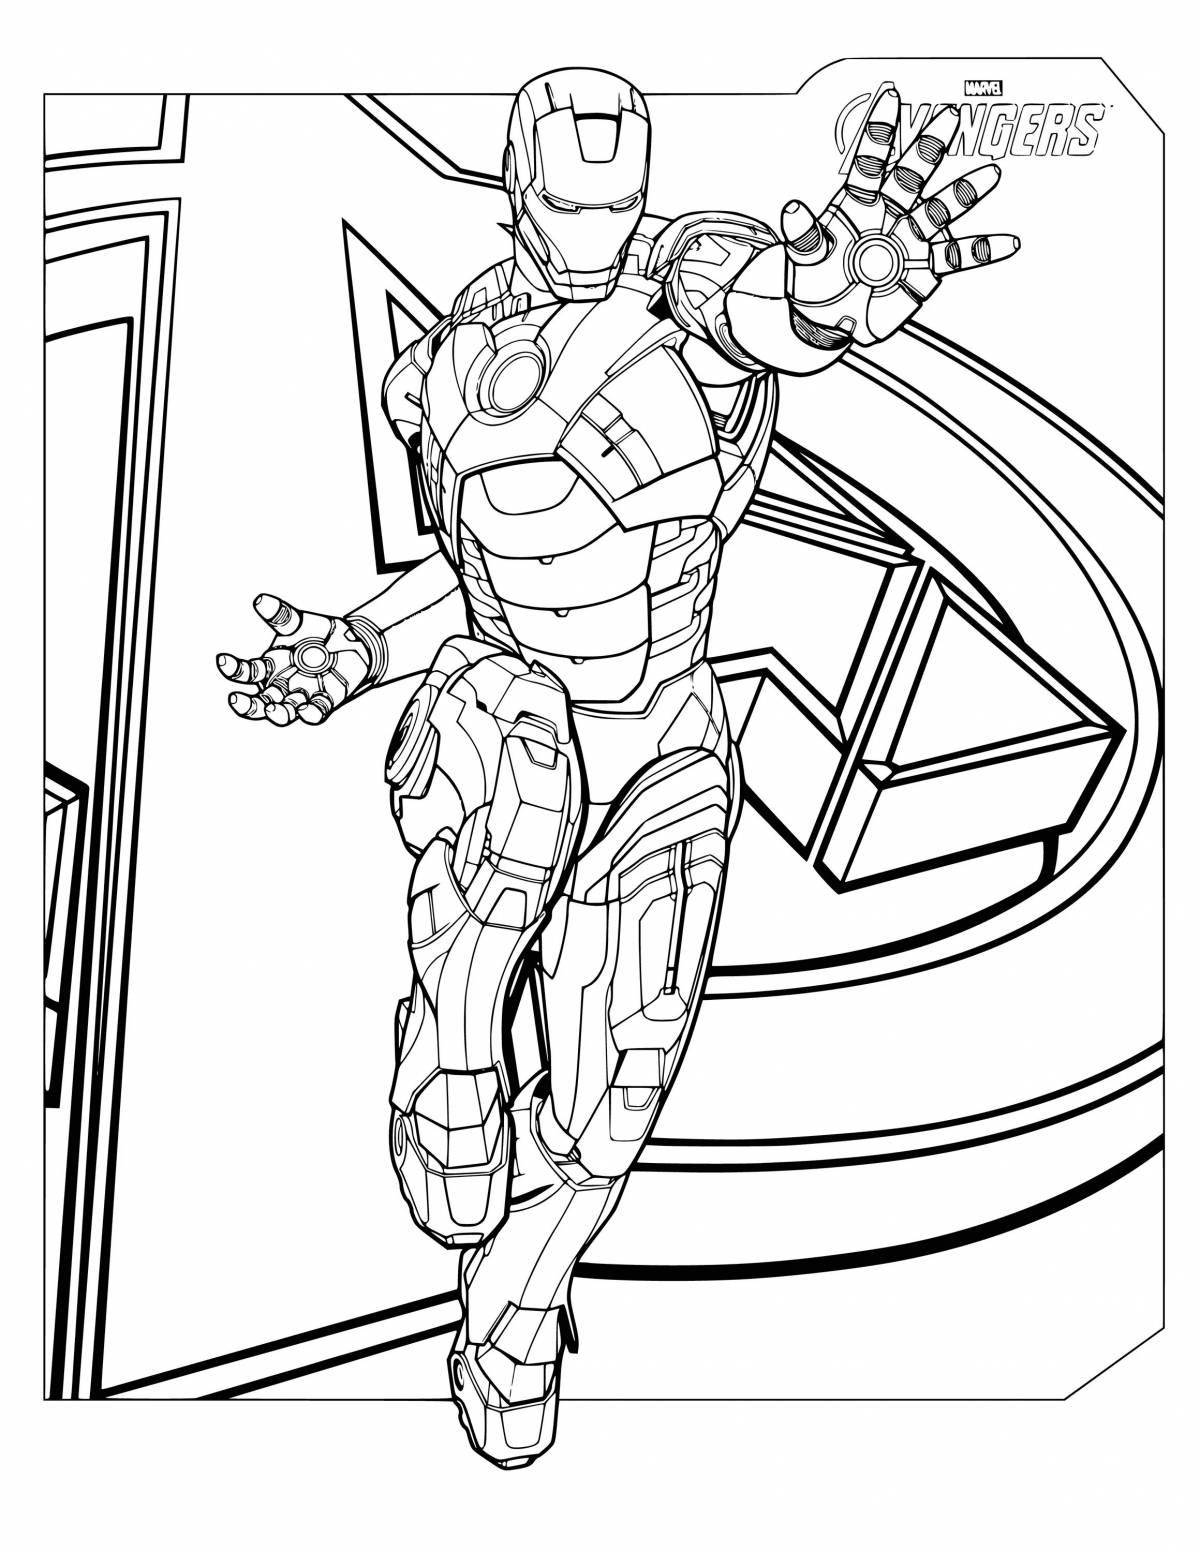 Excellent iron man coloring book for boys